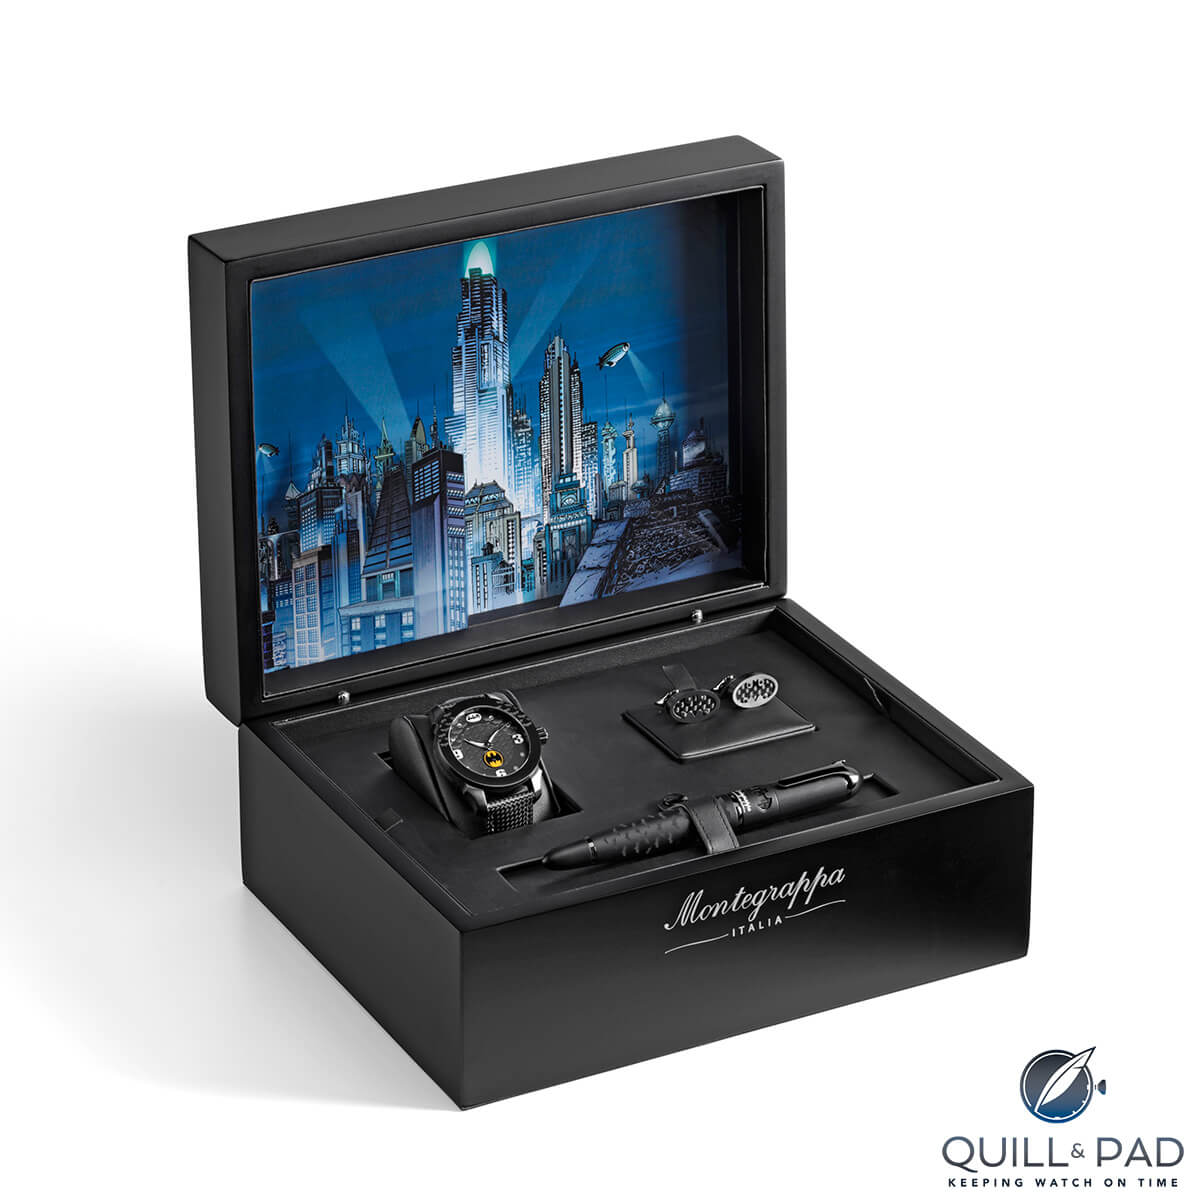 Gotham City-decorated presentation case for the Montegrappa Batman fountain pen, watch, and cufflinks